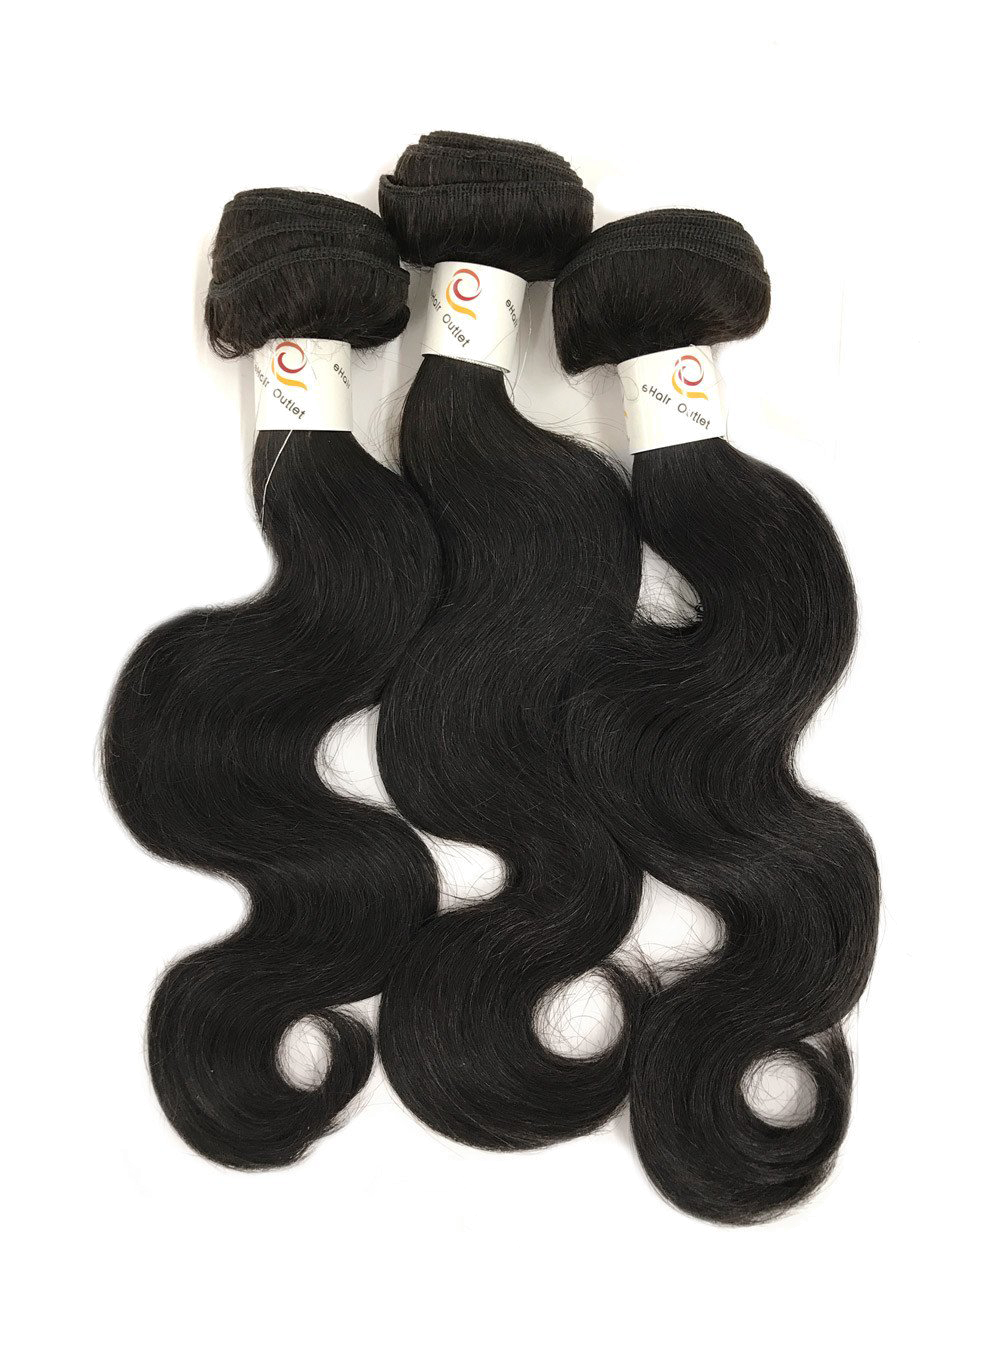 Load image into Gallery viewer, 5A Brazilian 3 Bundle Set Body Wave Virgin Human Hair Extension 300g - eHair Outlet
